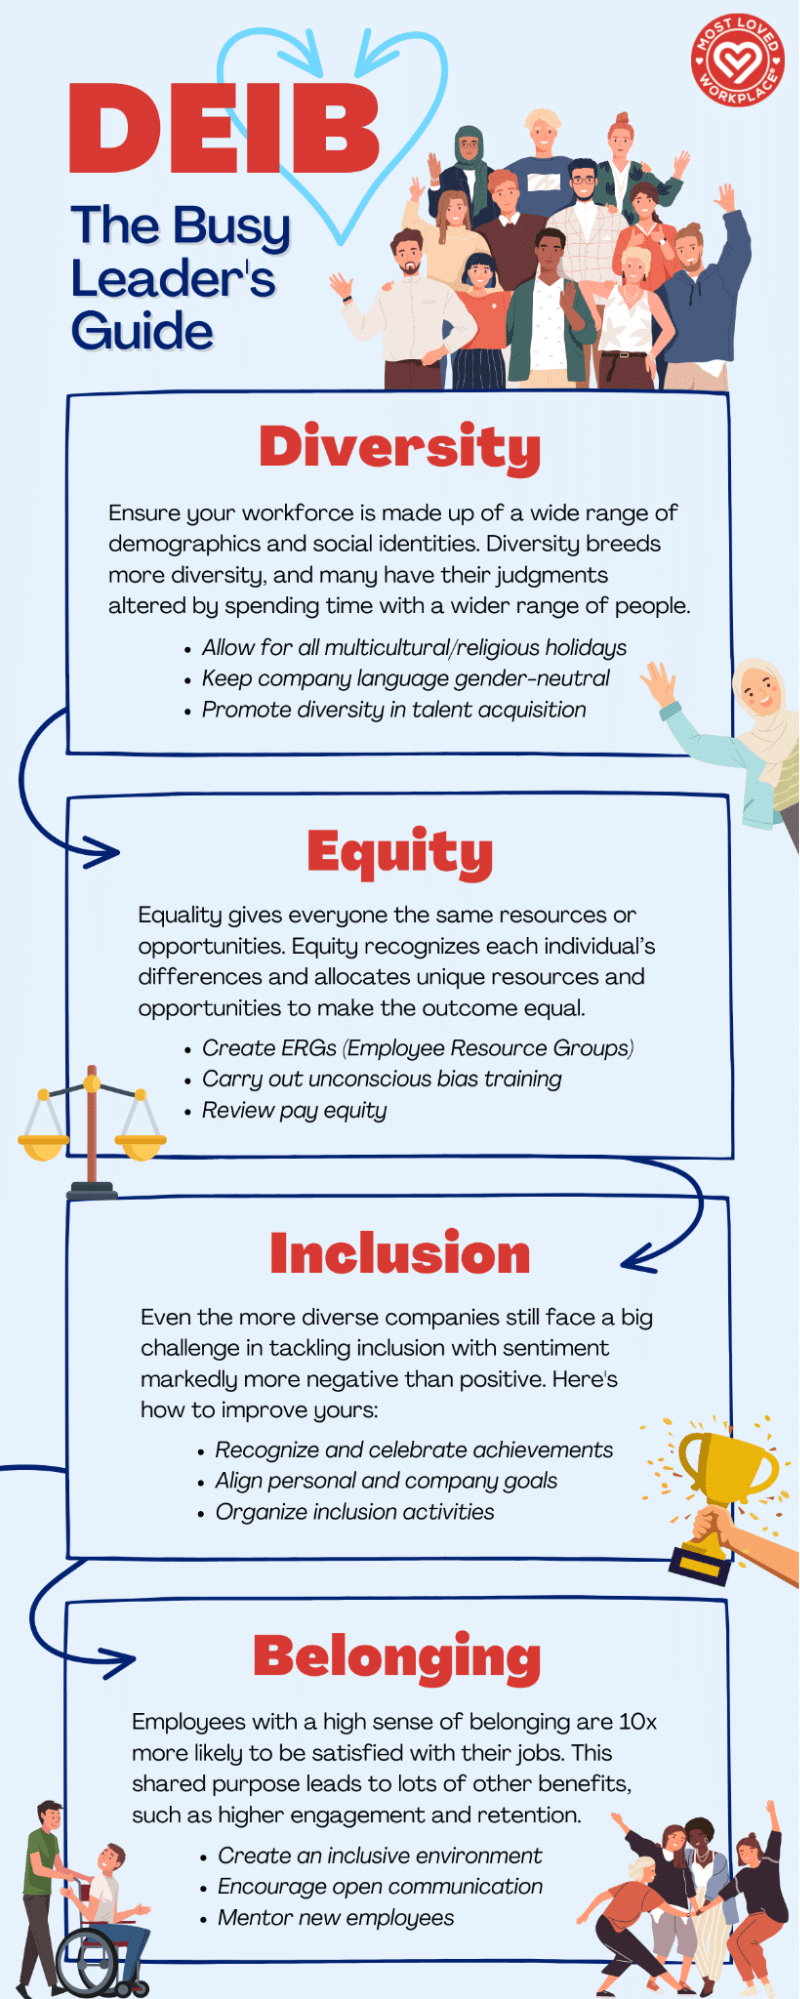 Diversity, equity, inclusion, and the sense of belonging that happens when you achieve the previous three.